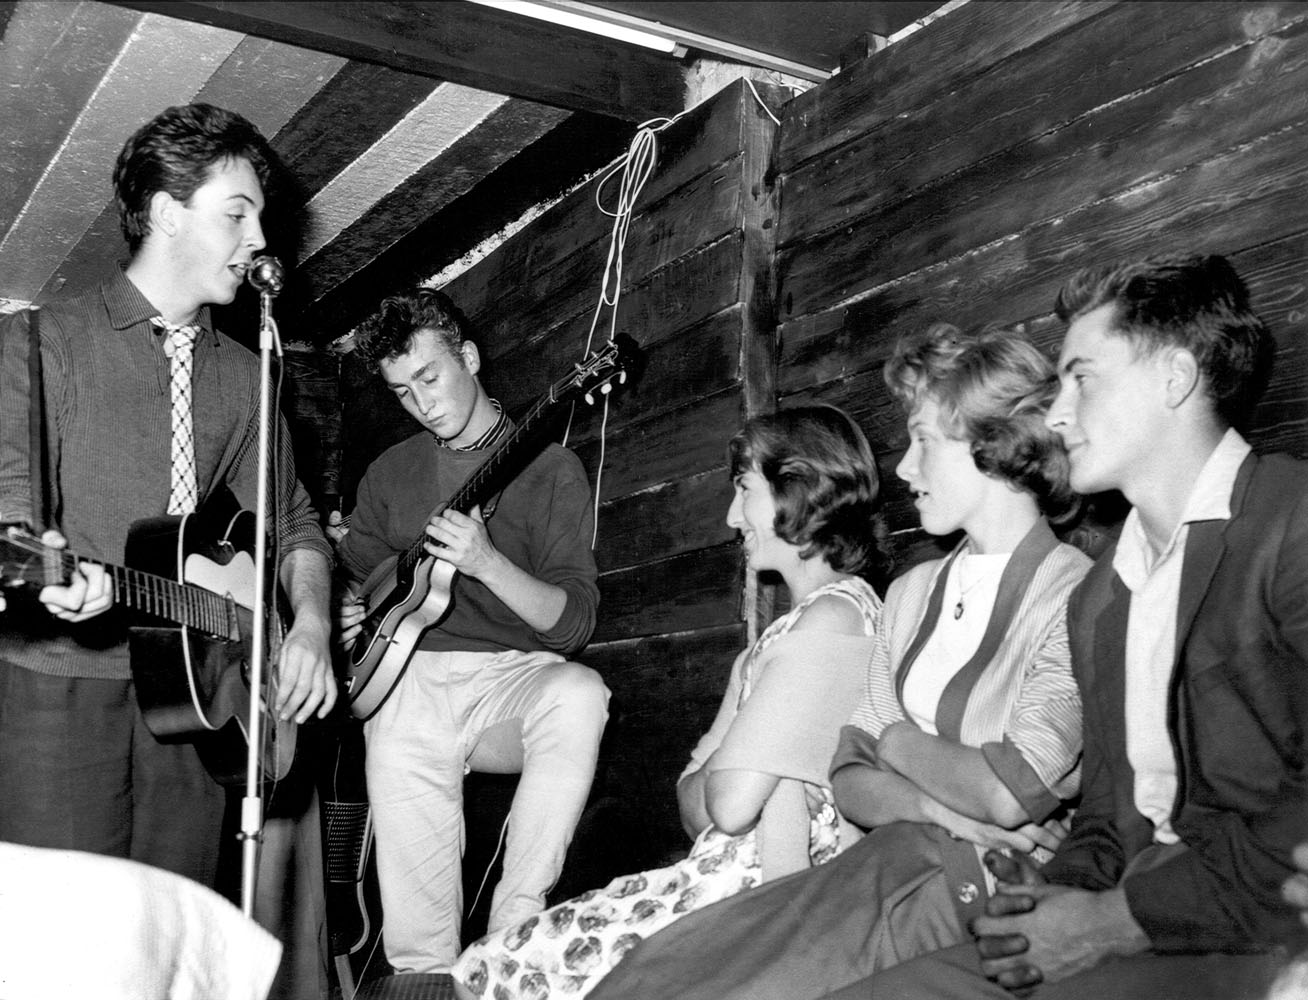 Paul McCartney and John Lennon members of the 'The Quarrymen' rock and roll band perform on stage at the Casbah Coffee House, Liverpool, England in 1959.